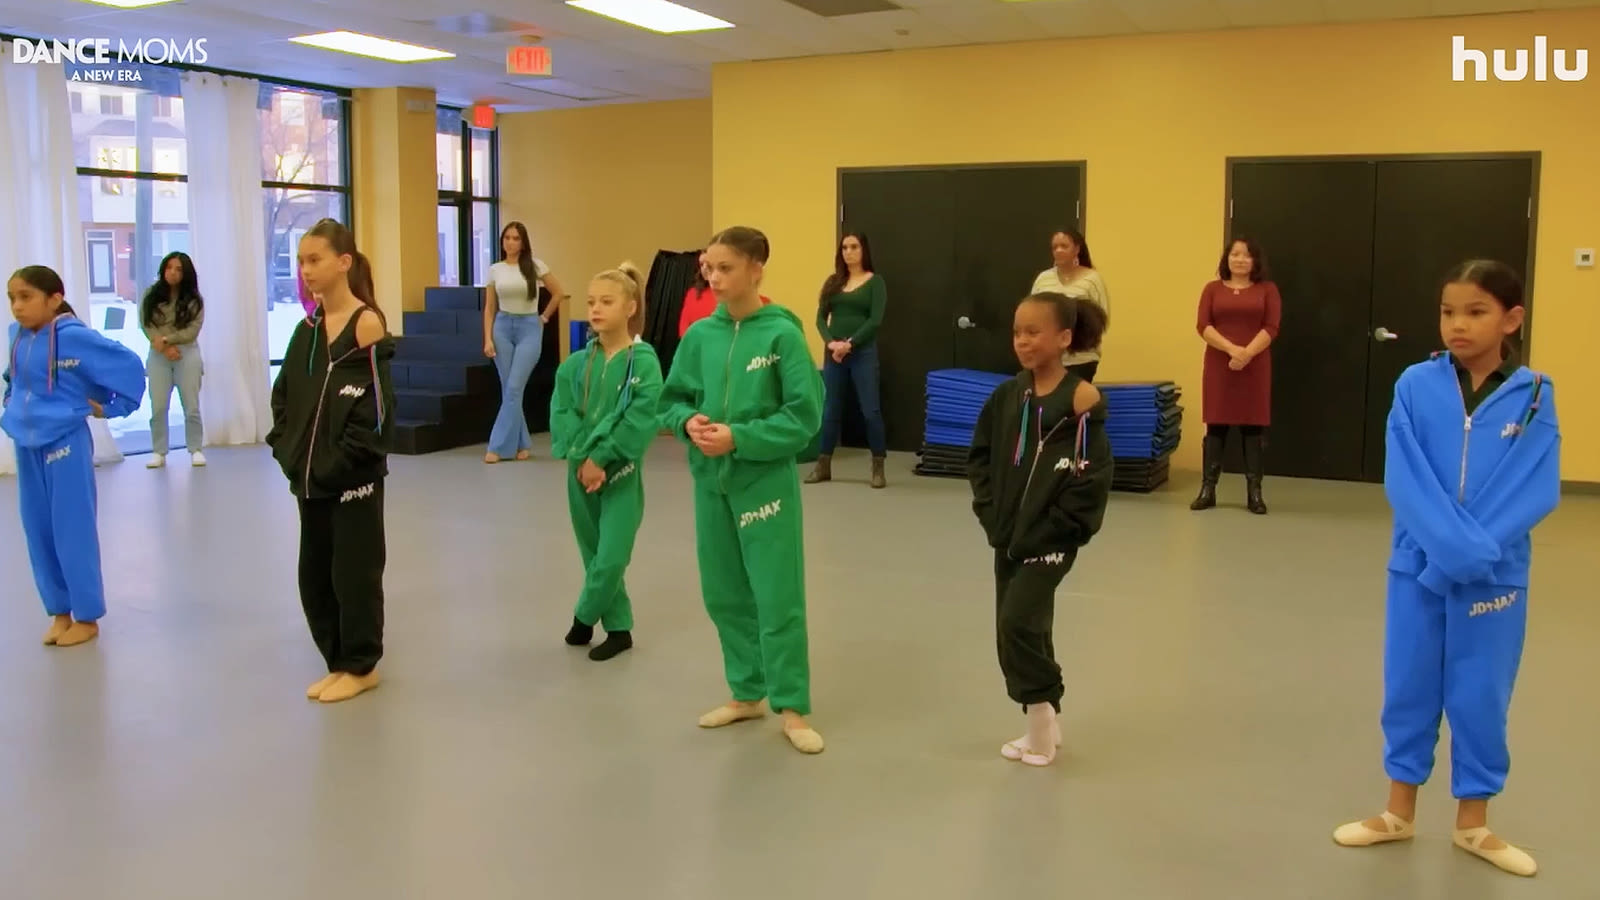 'Dance Moms: A New Era' shows the intense pressure young dancers face in newest trailer